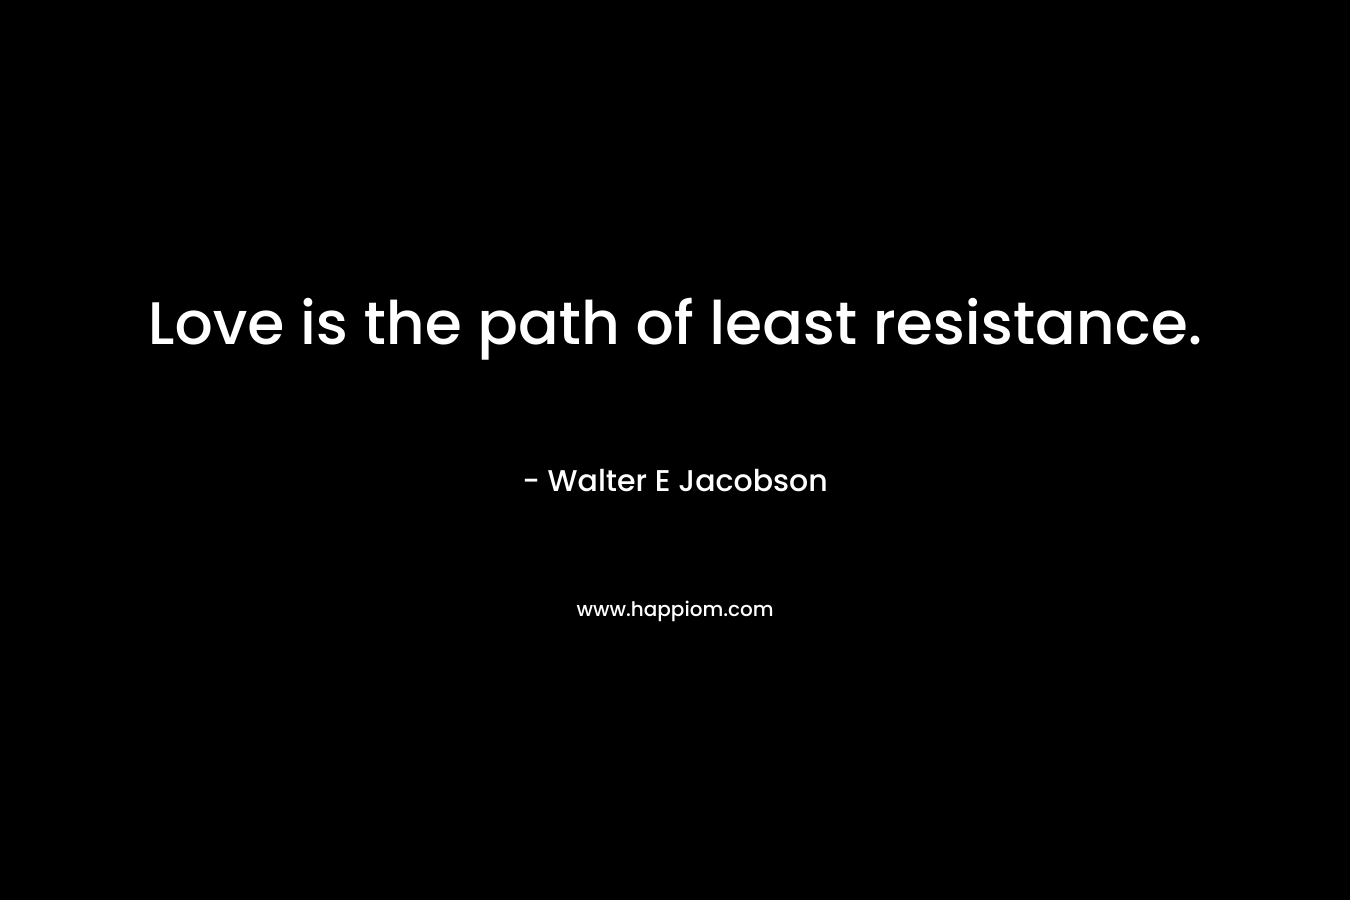 Love is the path of least resistance.